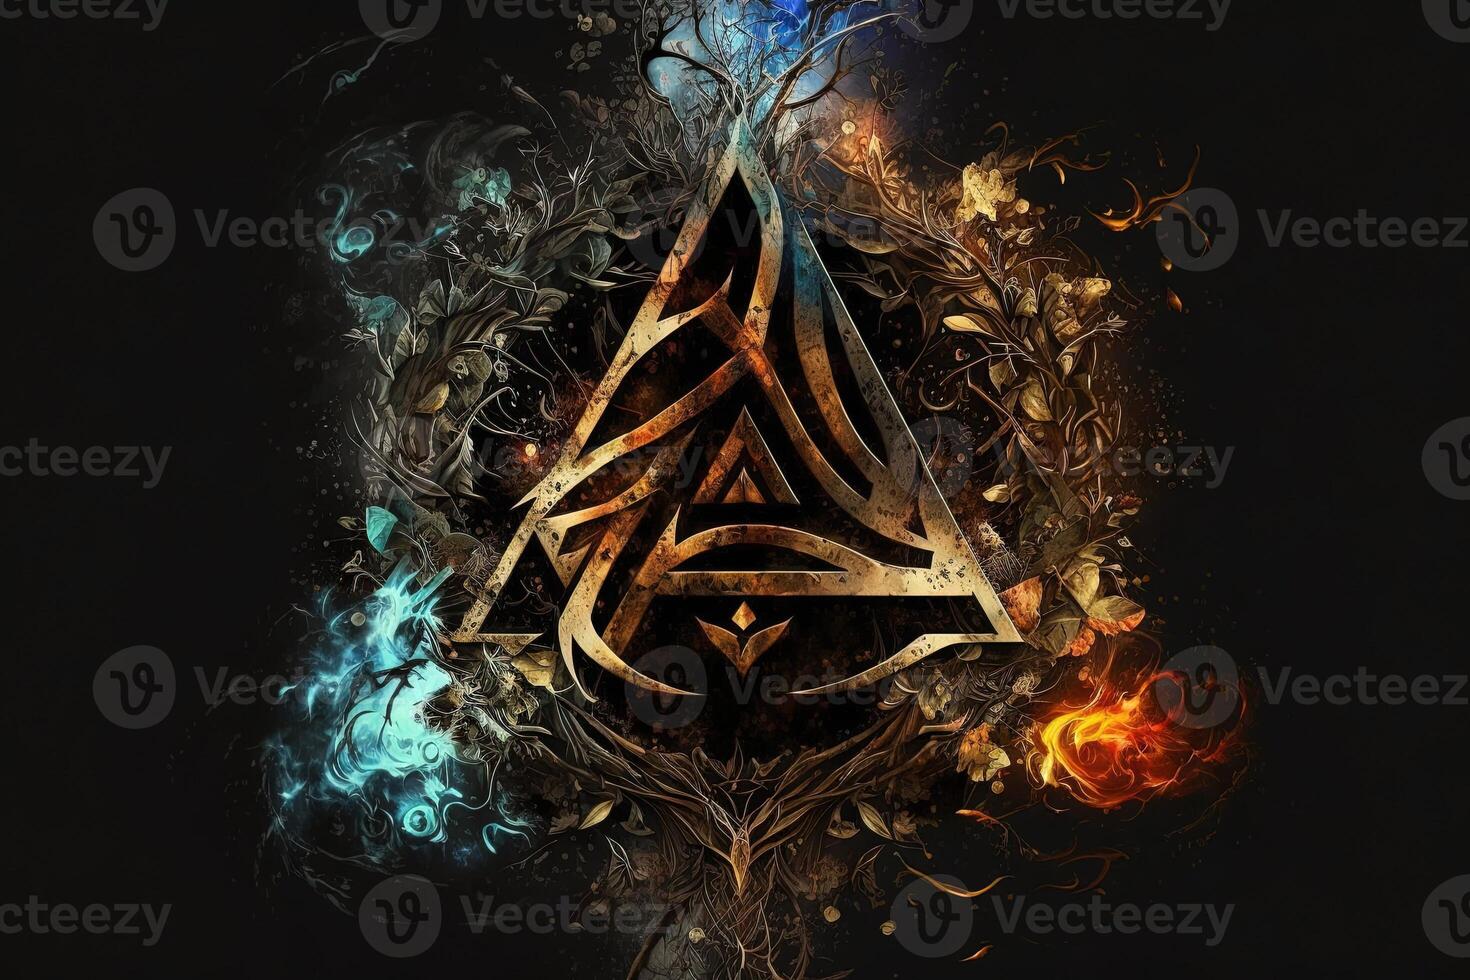 arcane symbol with effect of fire and ice. Magic symbol, Asgard symbol. Runes and triangle symbol with gold and metal color. photo